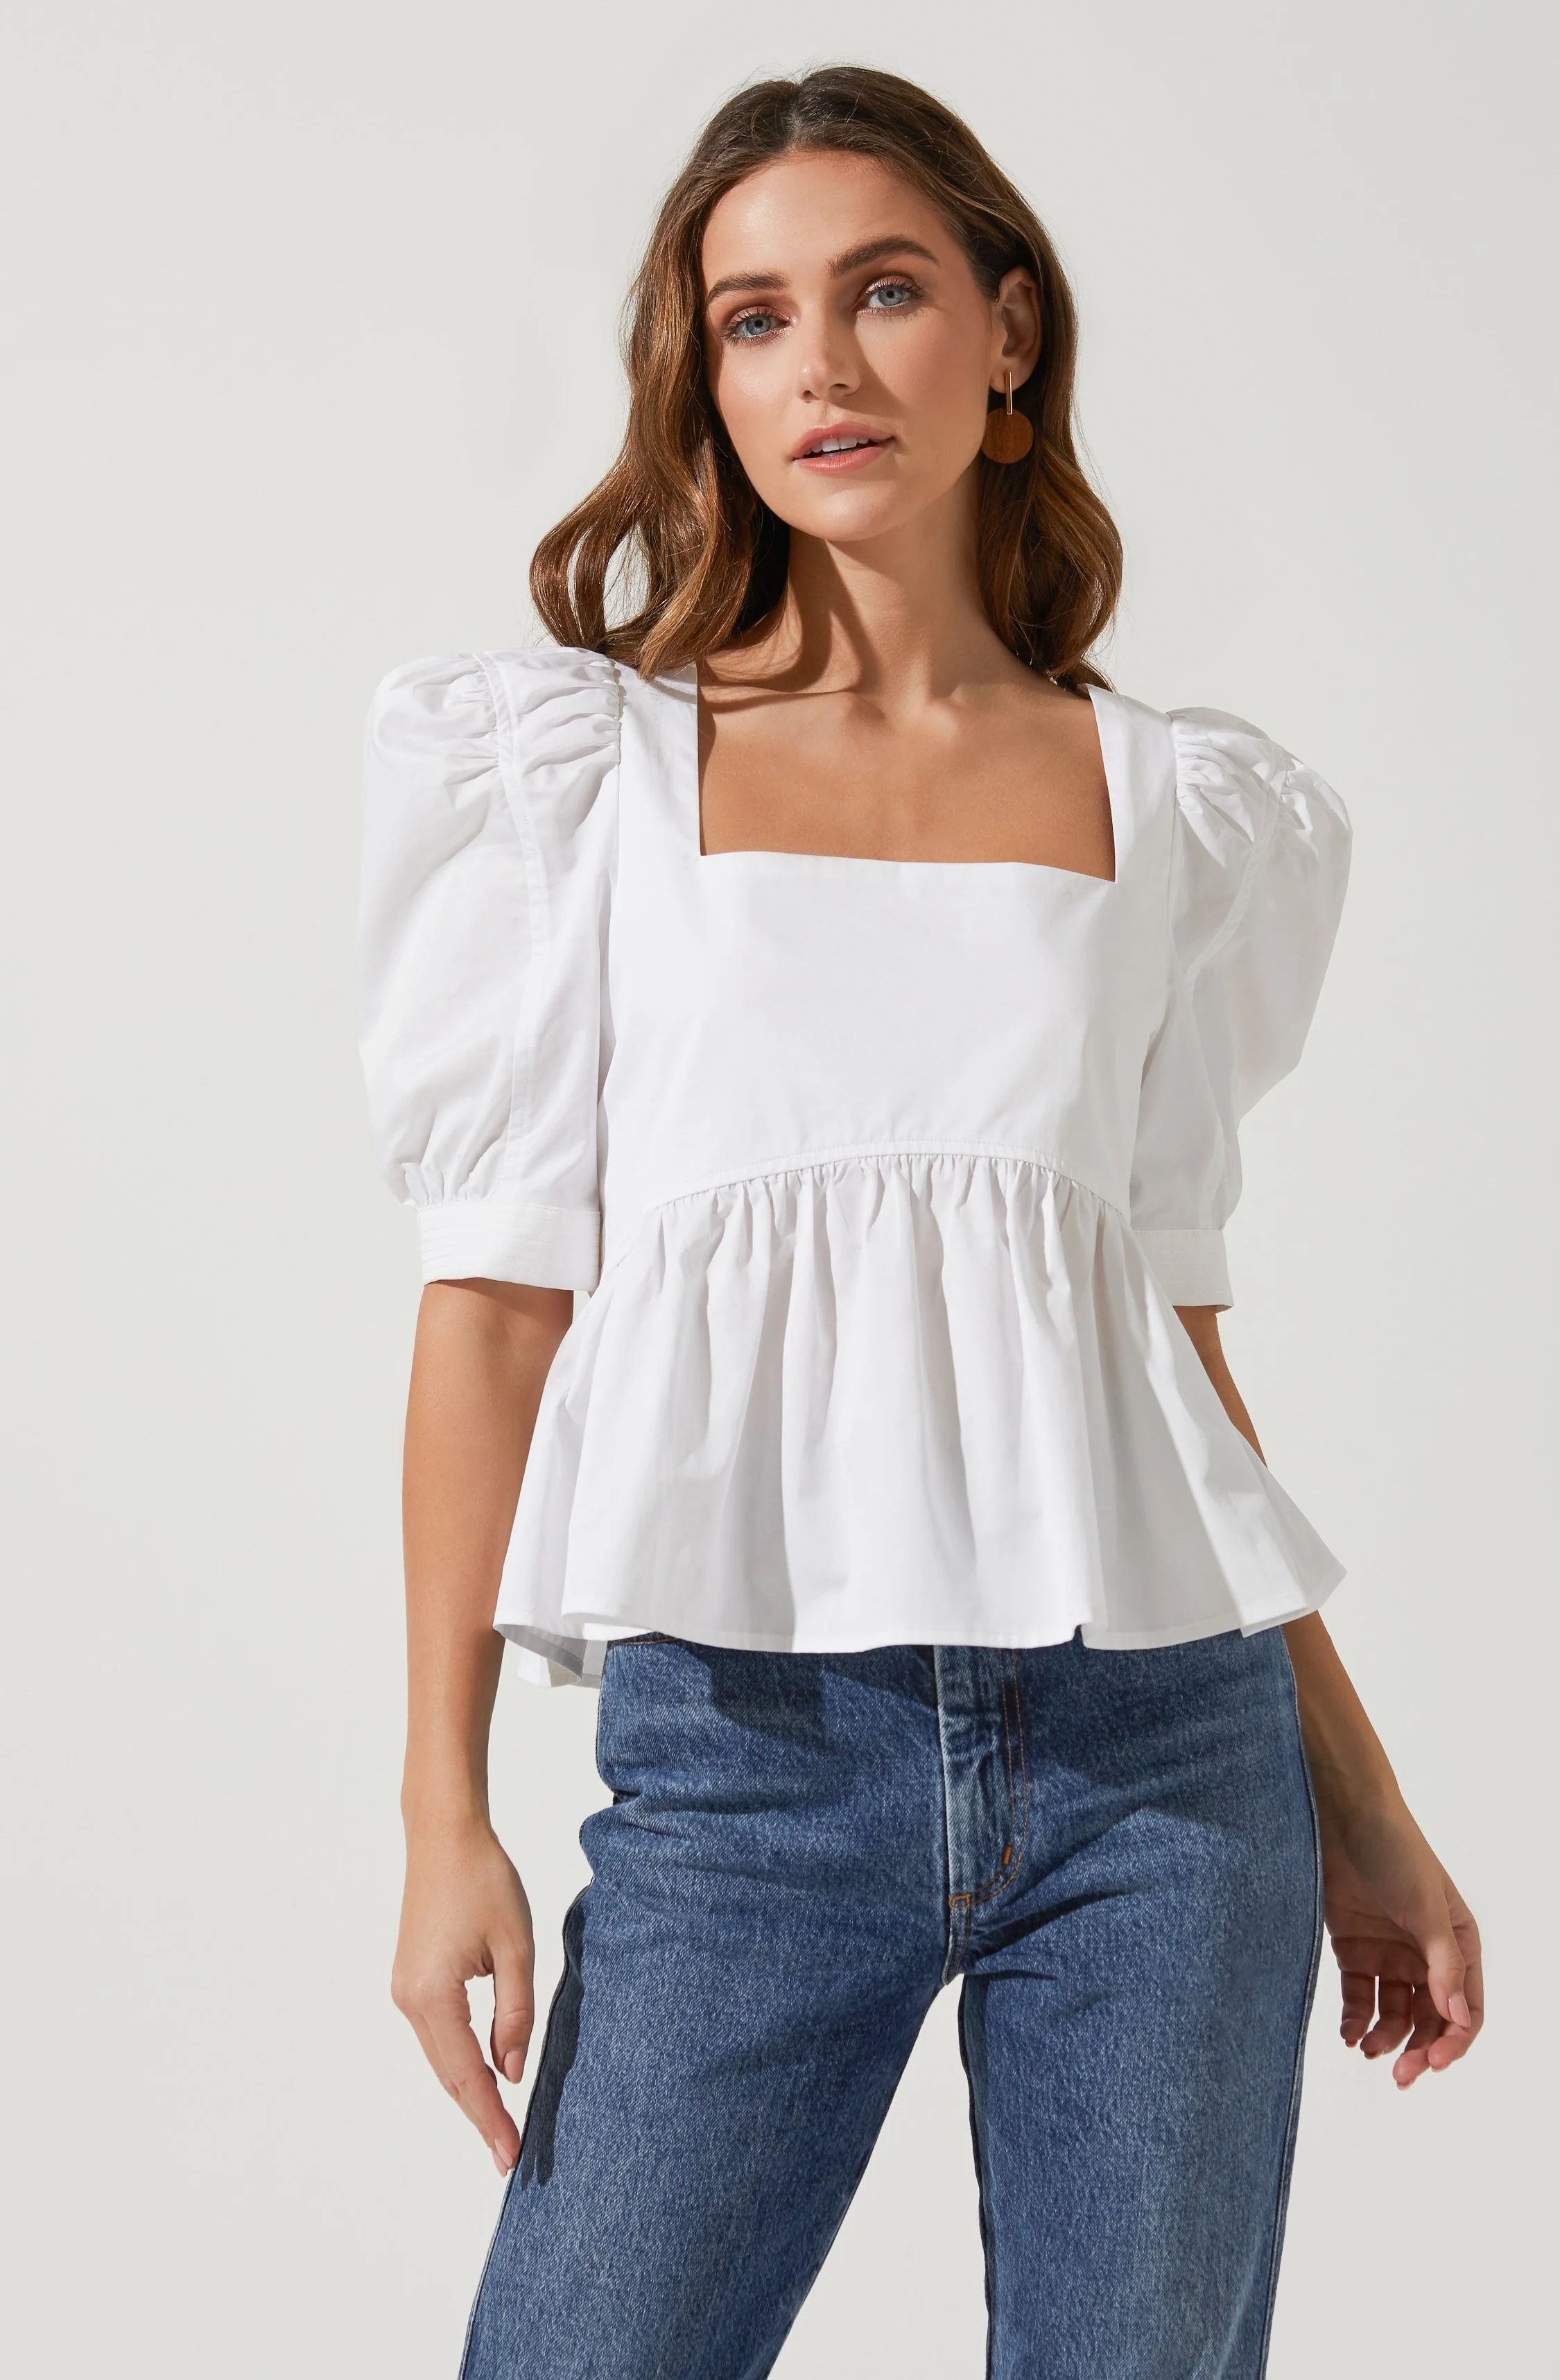 Sincerely Yours Peplum Top | ASTR The Label (US)